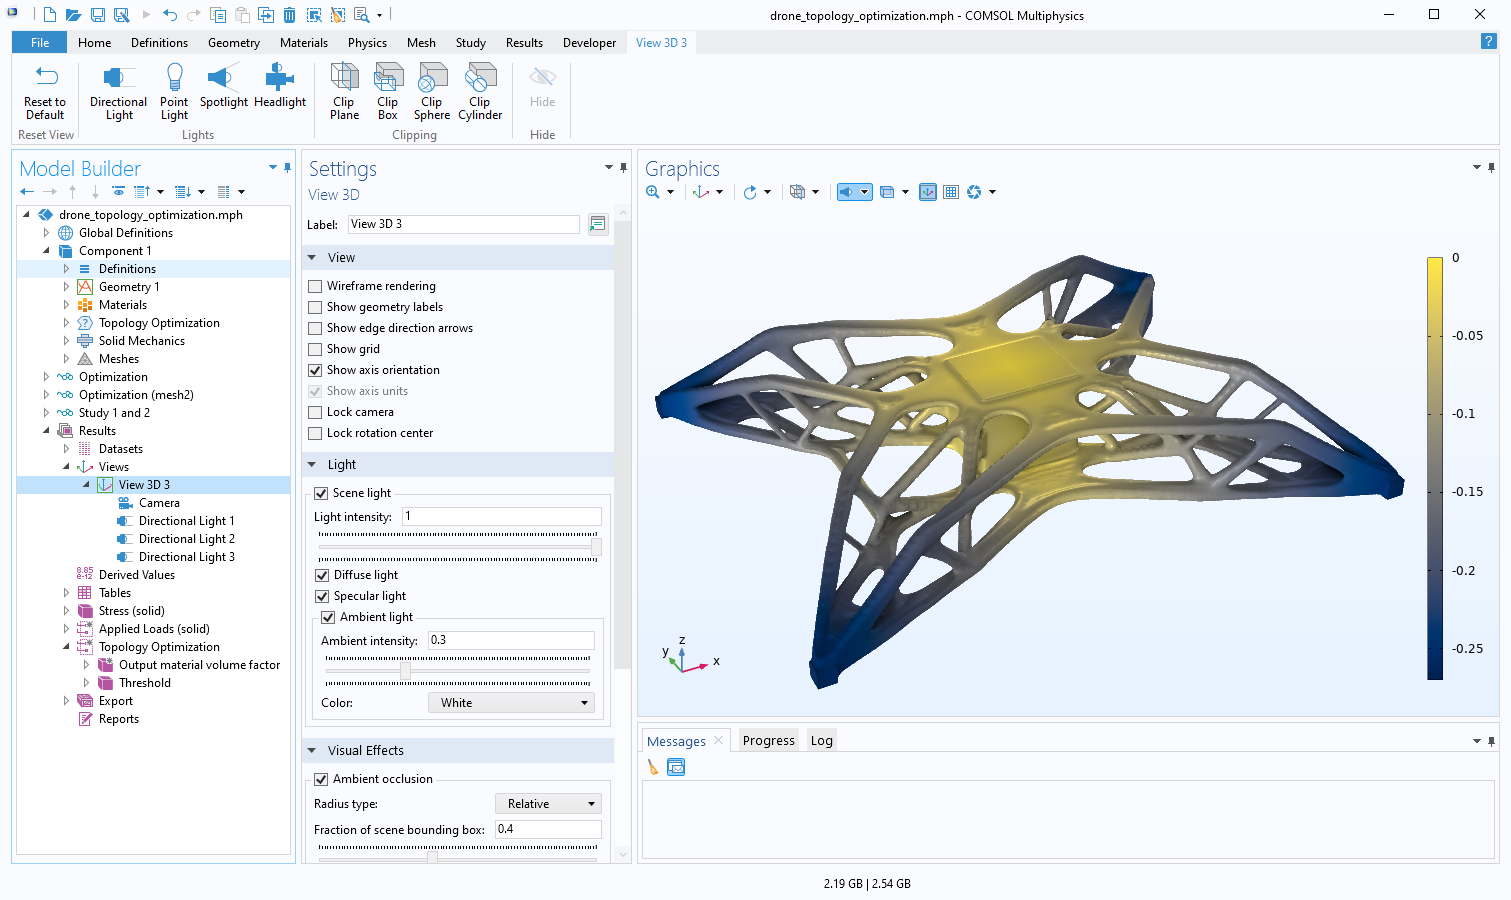 A screenshot of the Model Builder window and Graphics window in COMSOL Multiphysics. The View node is selected in the Model Builder window and some of the settings are shown, including the Ambient Occlusion check box. The Graphics window displays the results of a drone topology optimization model.